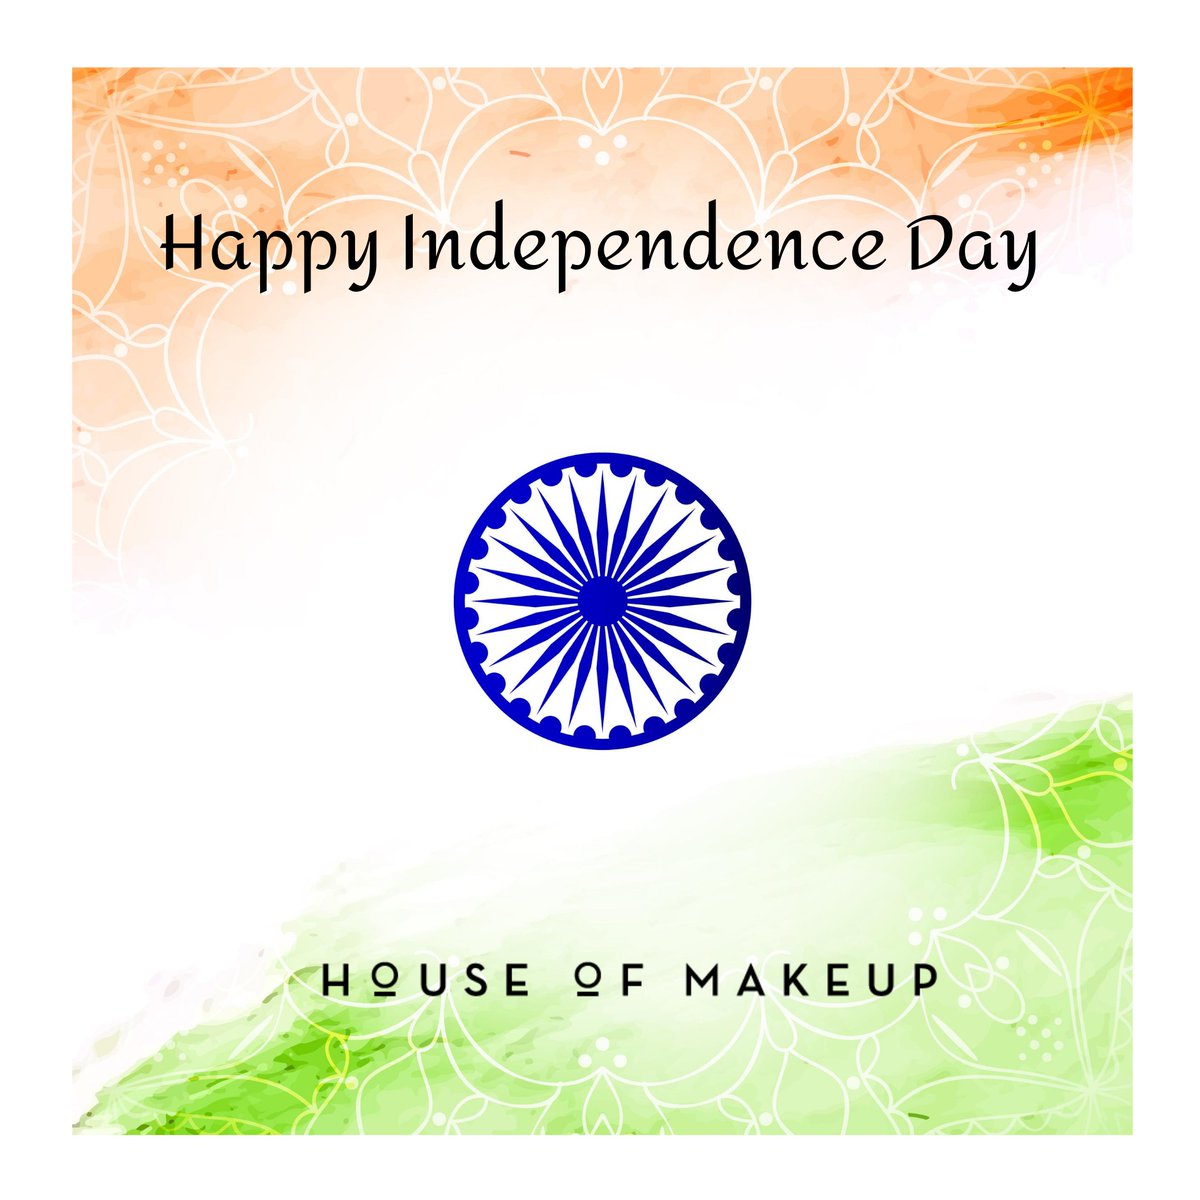 🇮🇳Happy 74th Independence Day, InstaFam!🇮🇳

#houseofmakeupofficial #india #independenceday #independence #independencepass #fitnessindustry #independent #74 #74thindependenceday #mumbai